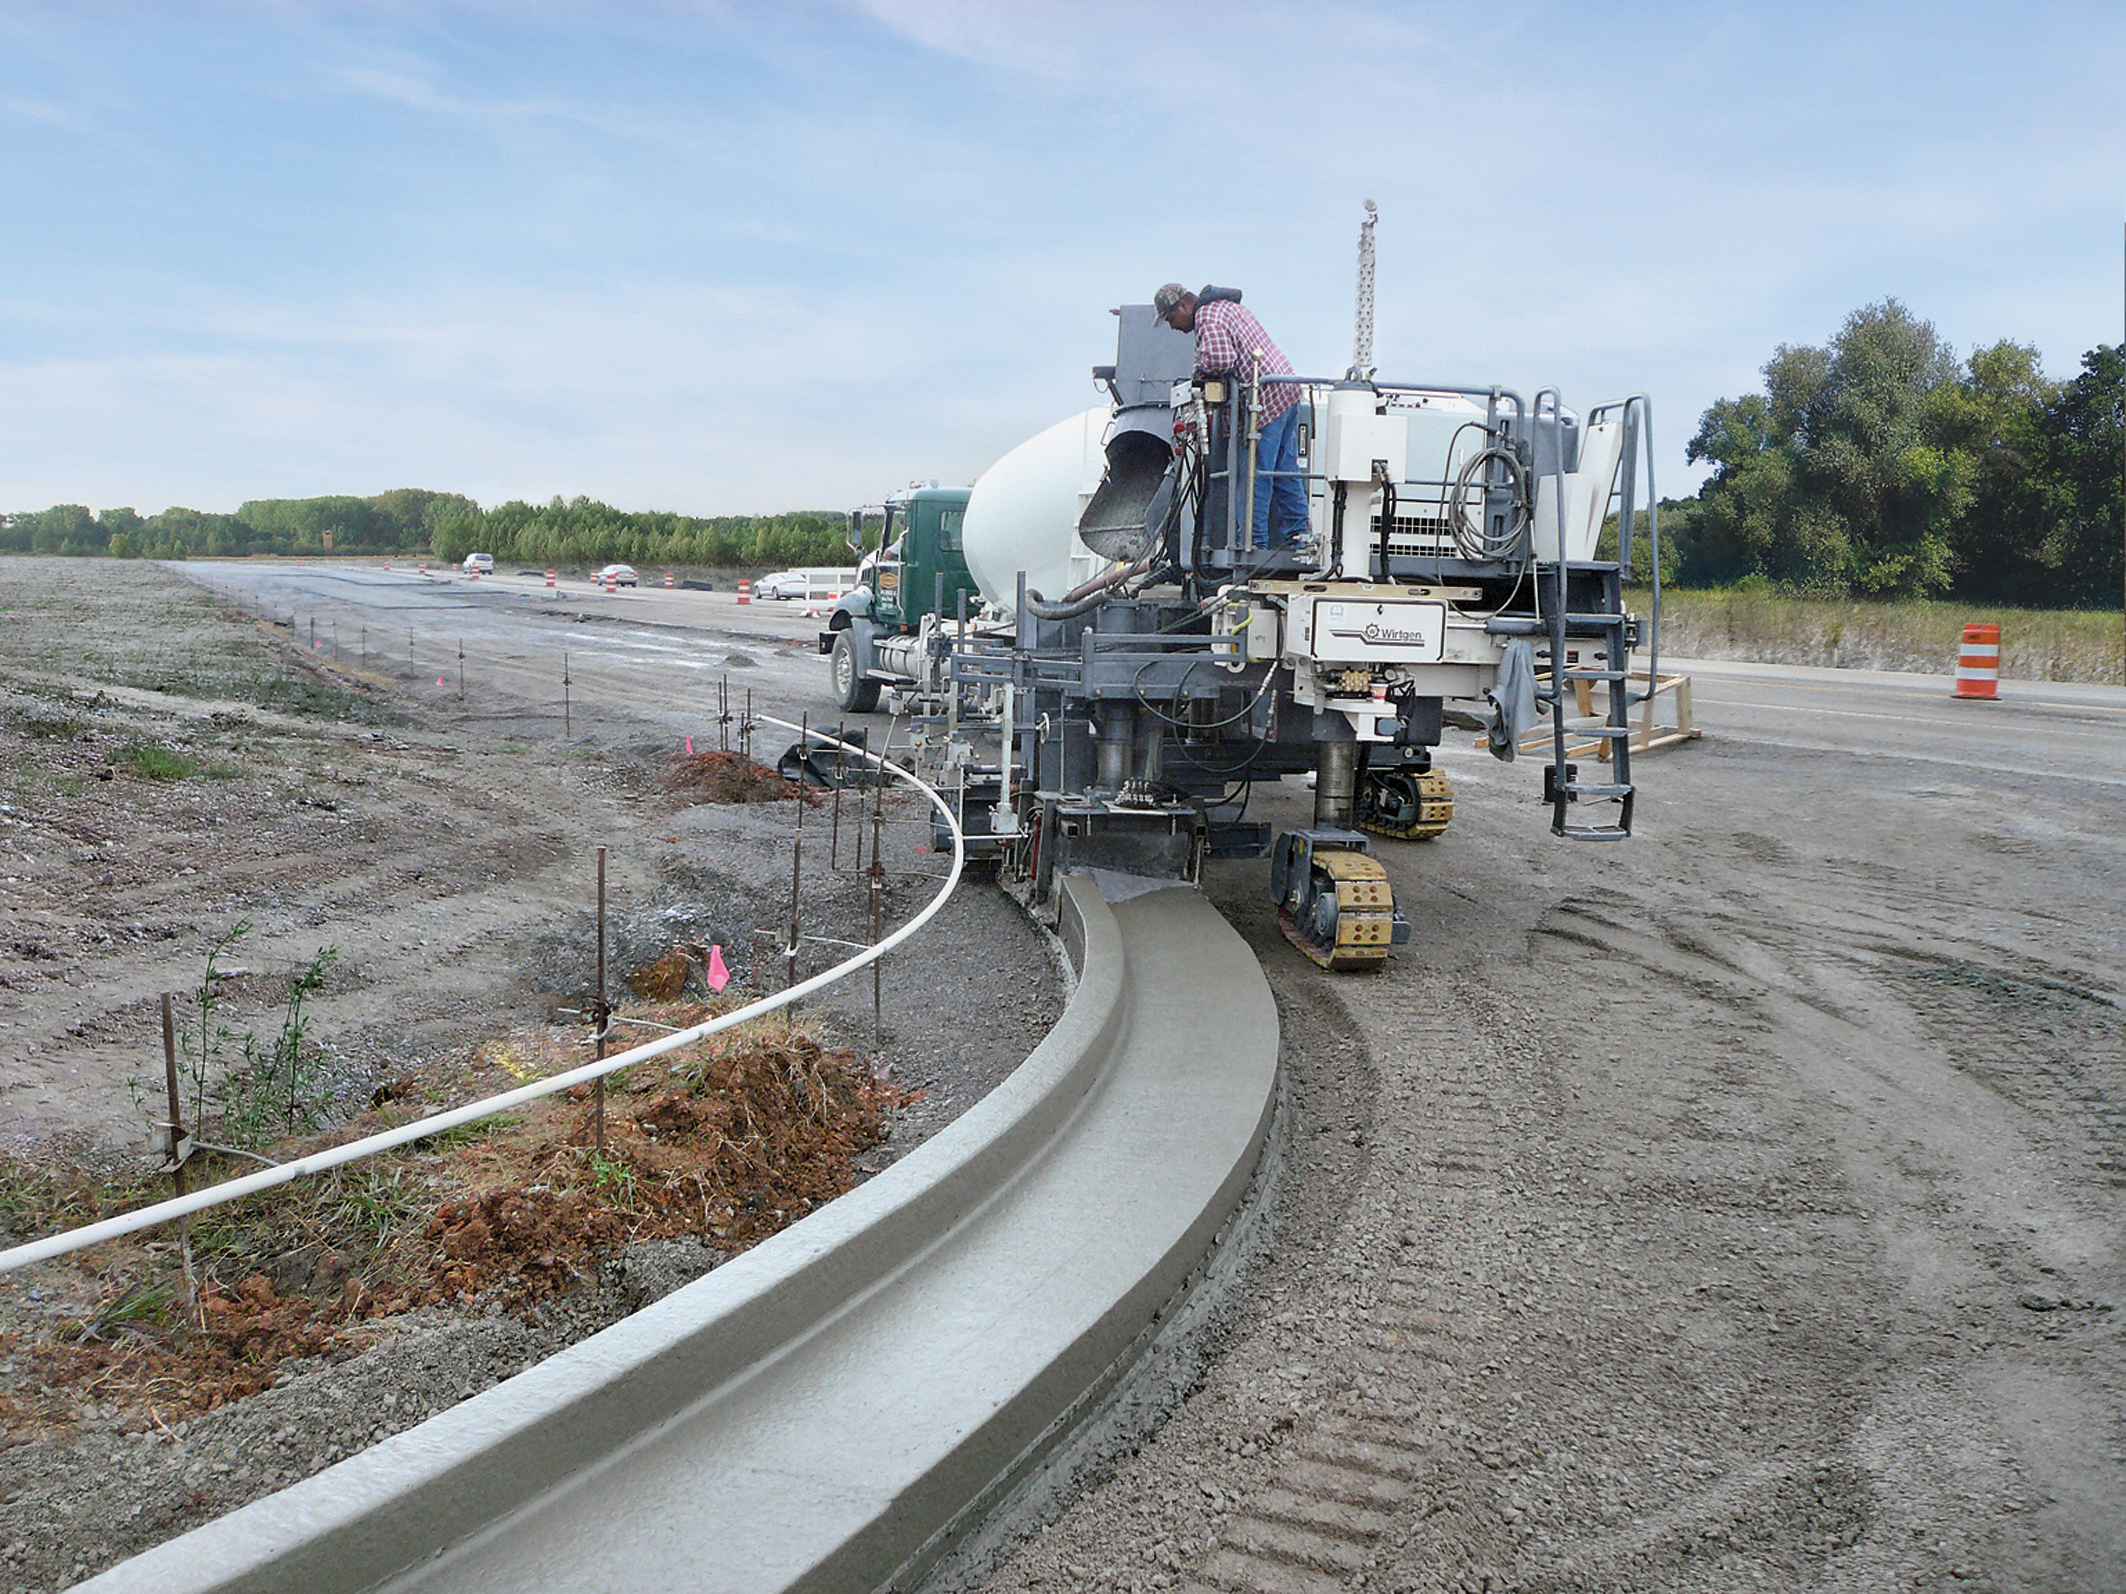 Wirtgen's new SP15 pouring curved barrier